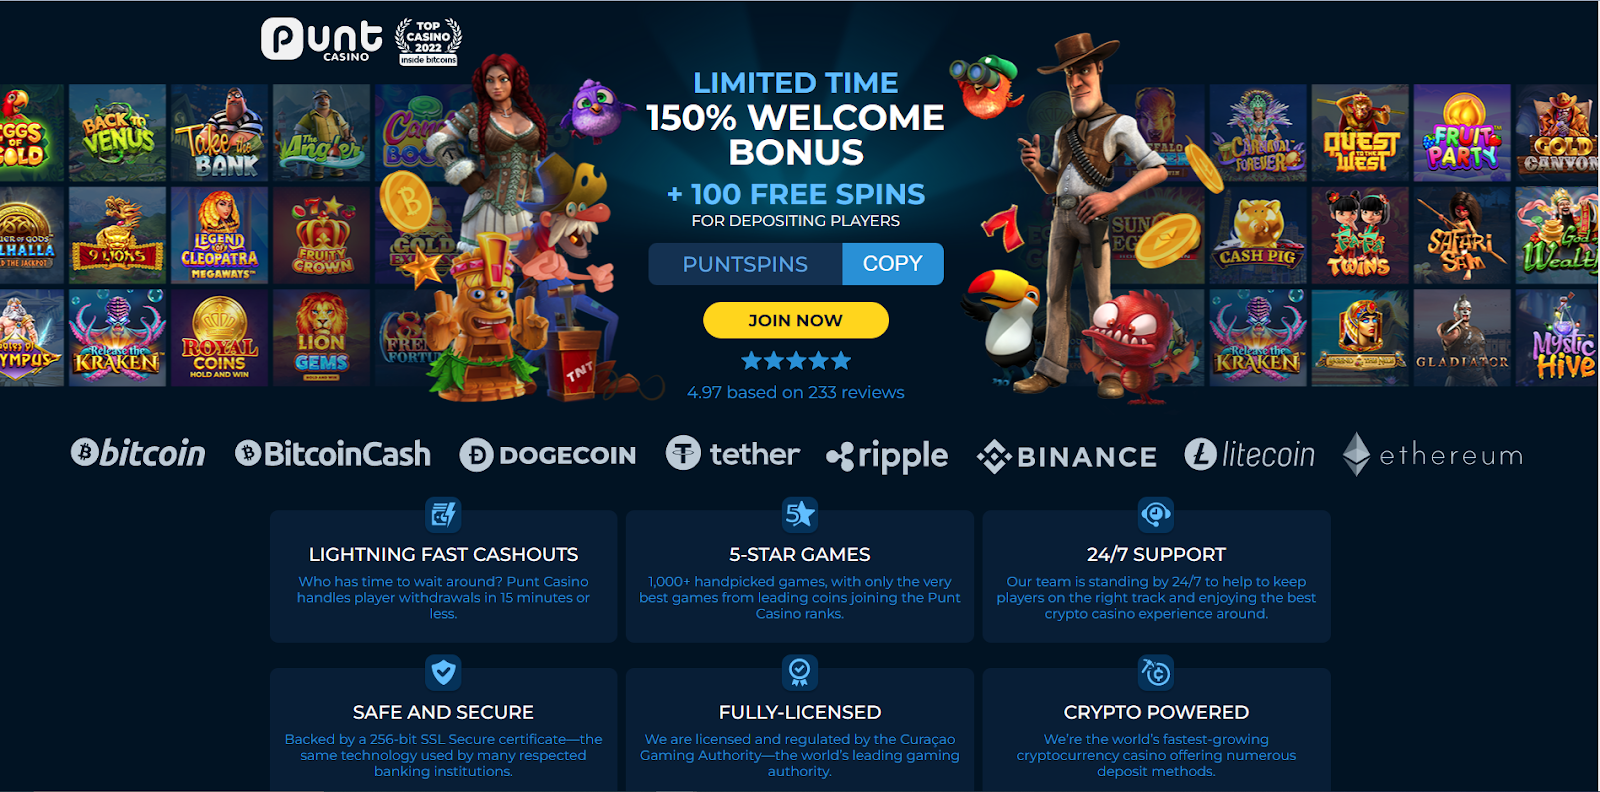 11. Punt Casino - Up to 150% & 100 Free Spins